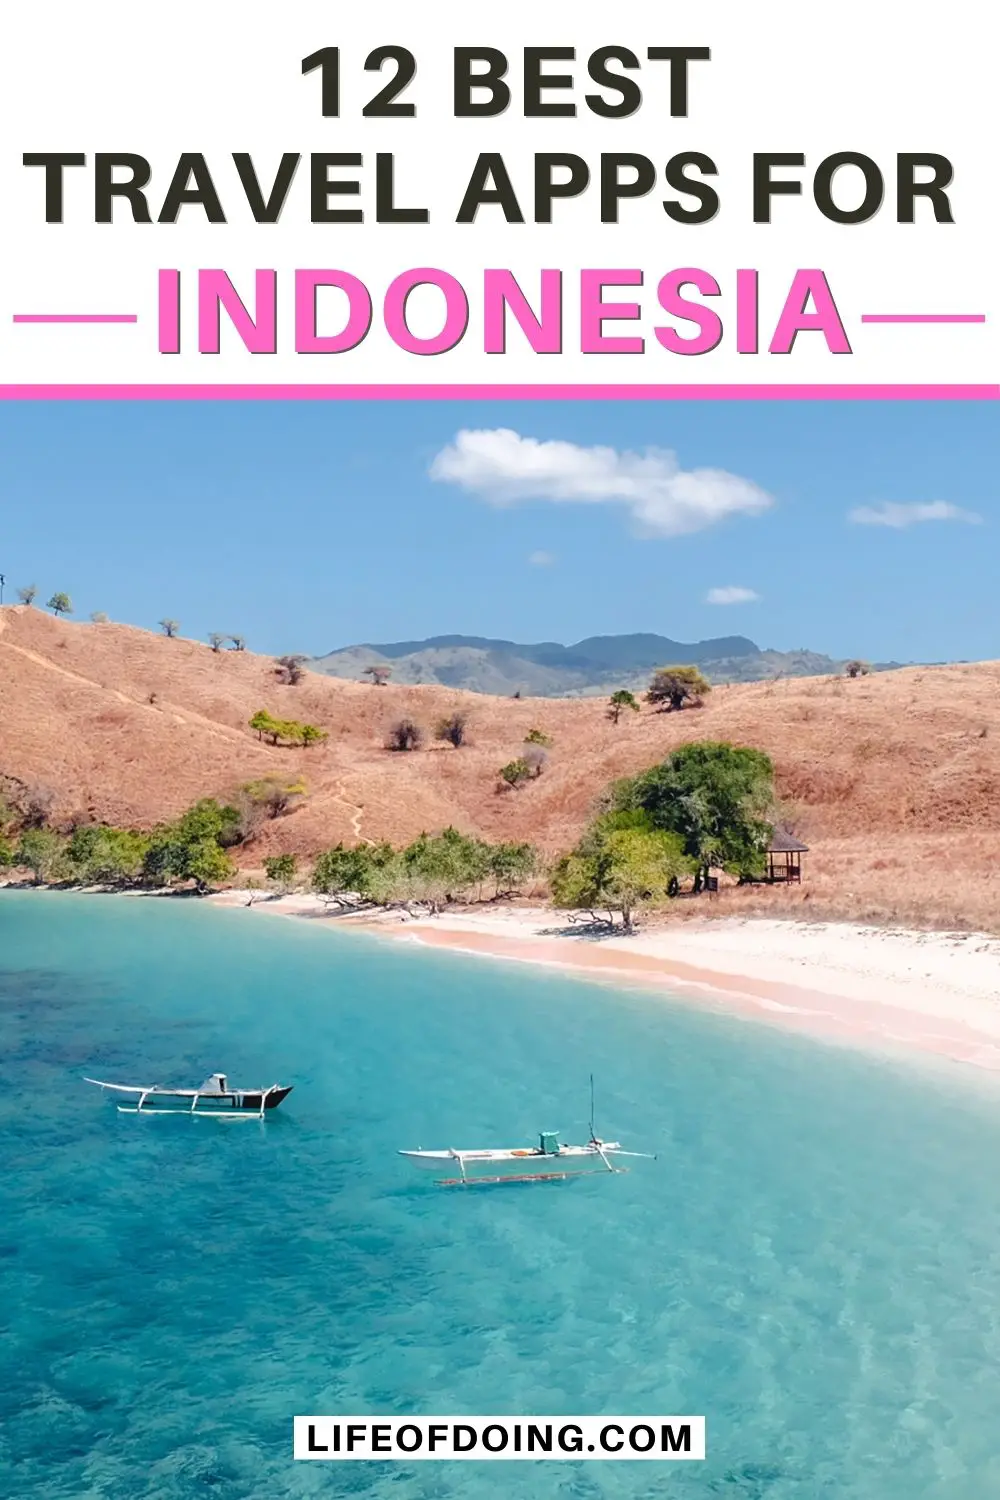 Two boats in the blue waters and next to the pink sandy beach in Indonesia, and the text of 12 Best Travel Apps for Indonesia